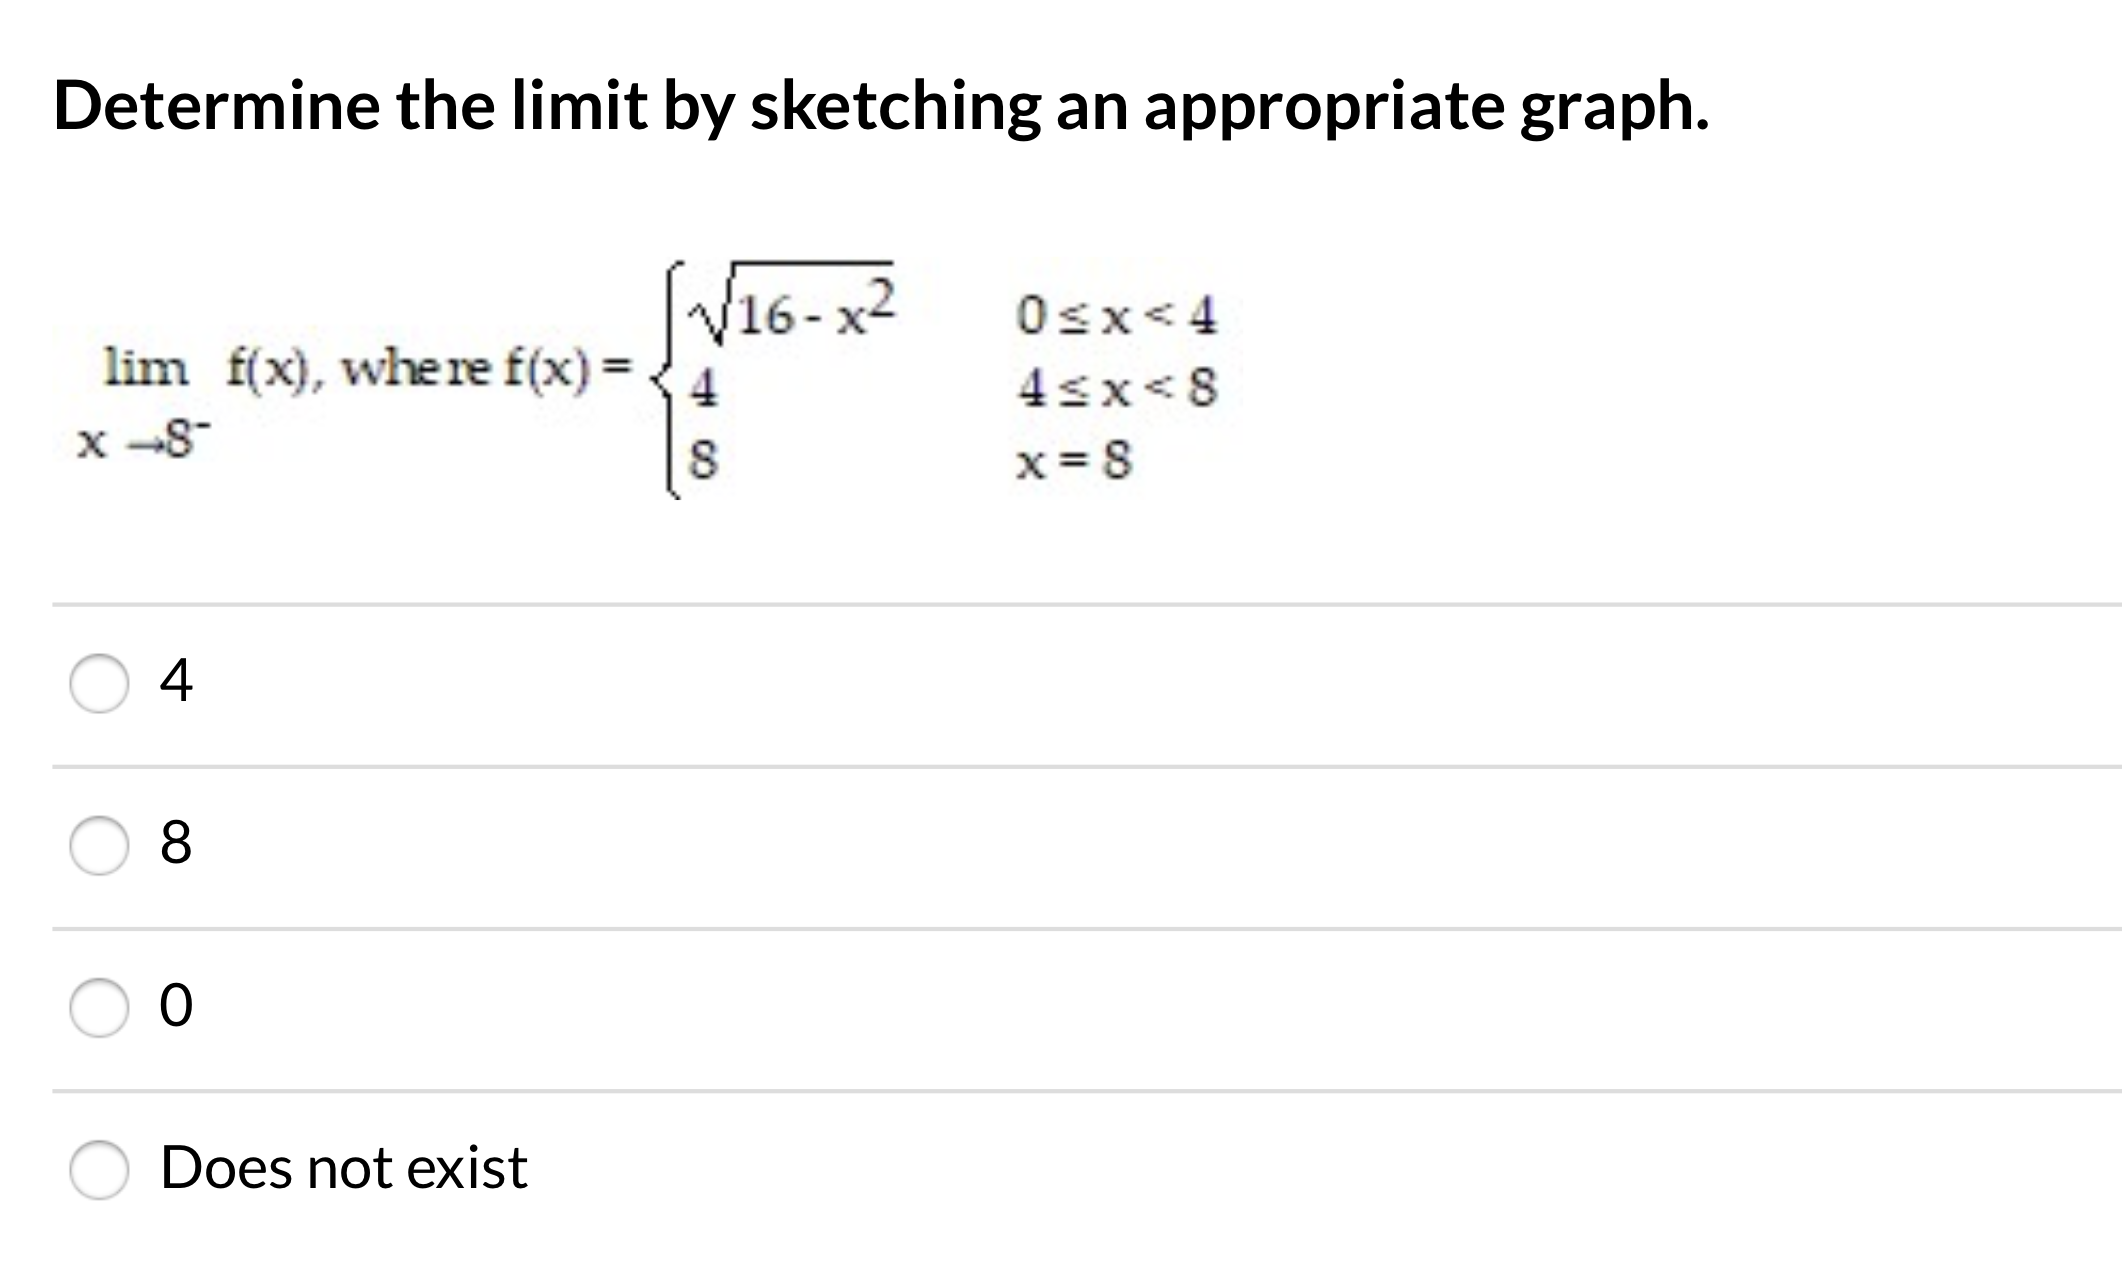 Determine the limit by sketching an appropriate graph.
V16-x2
Osx< 4
lim f(x), where f(x) =
4
4sx<8
x --8-
x = 8
